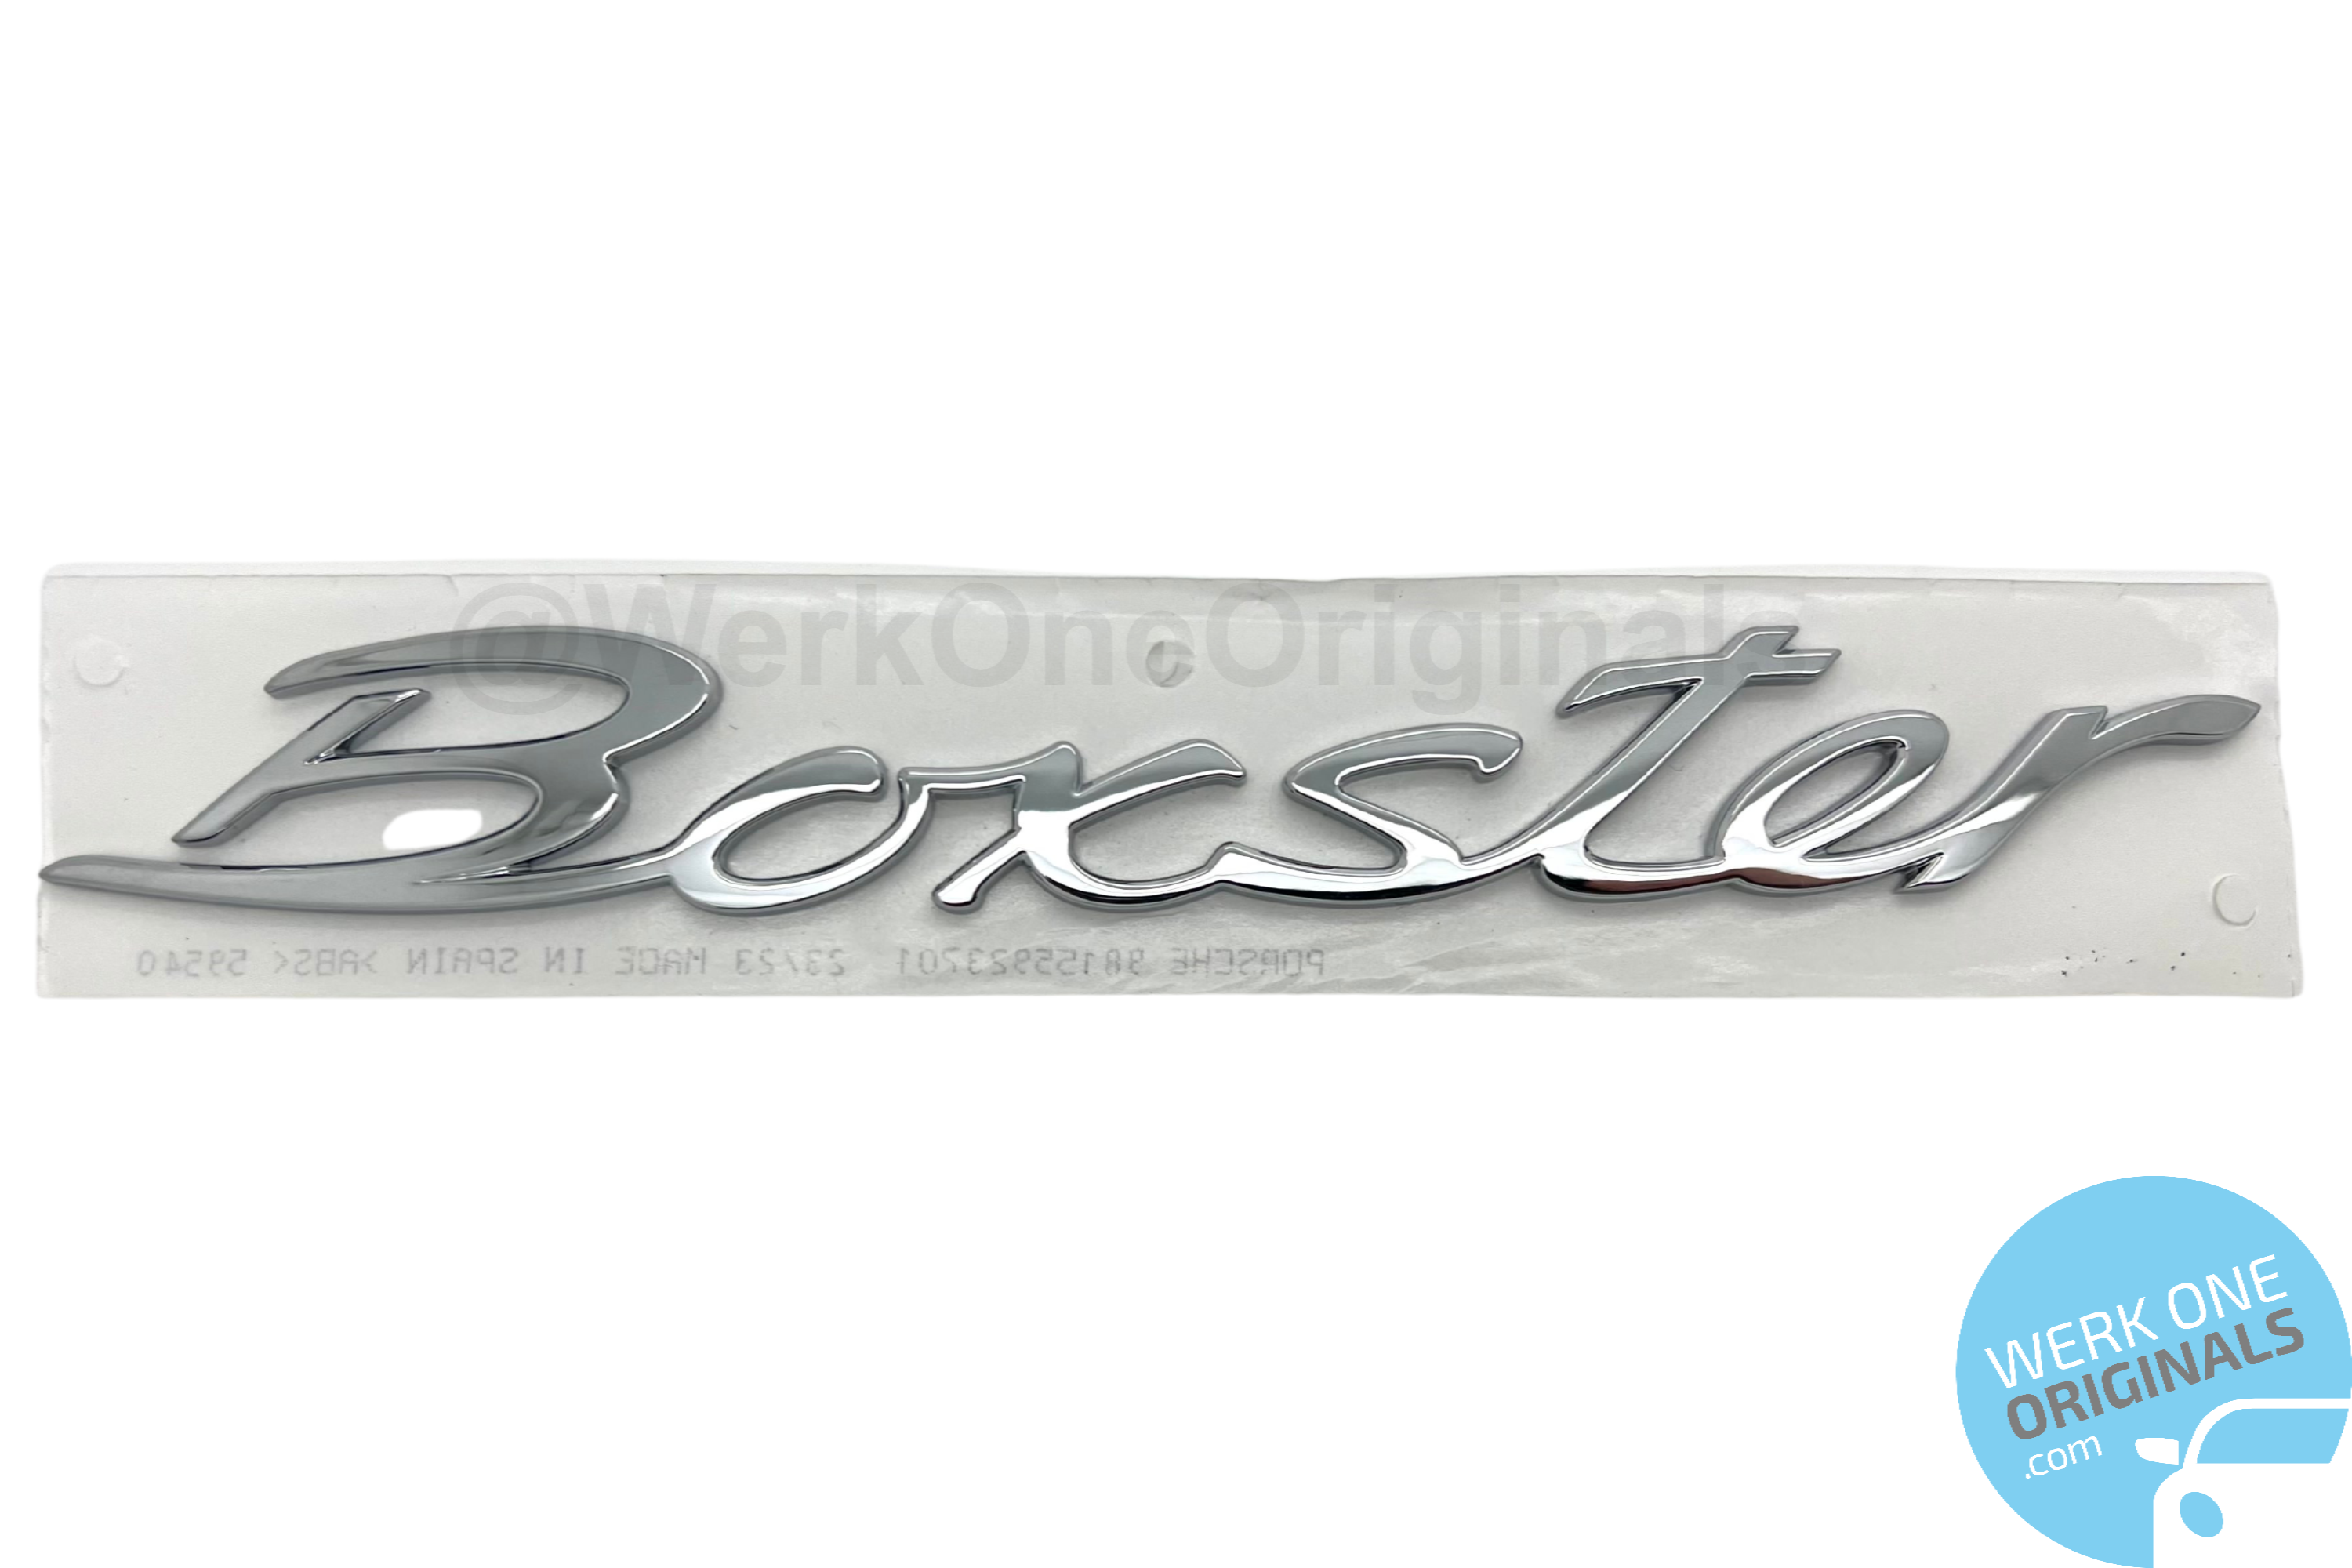 Porsche Official 'Boxster S' Rear Badge Decal in Chrome Silver for Boxster S Type 981 Models